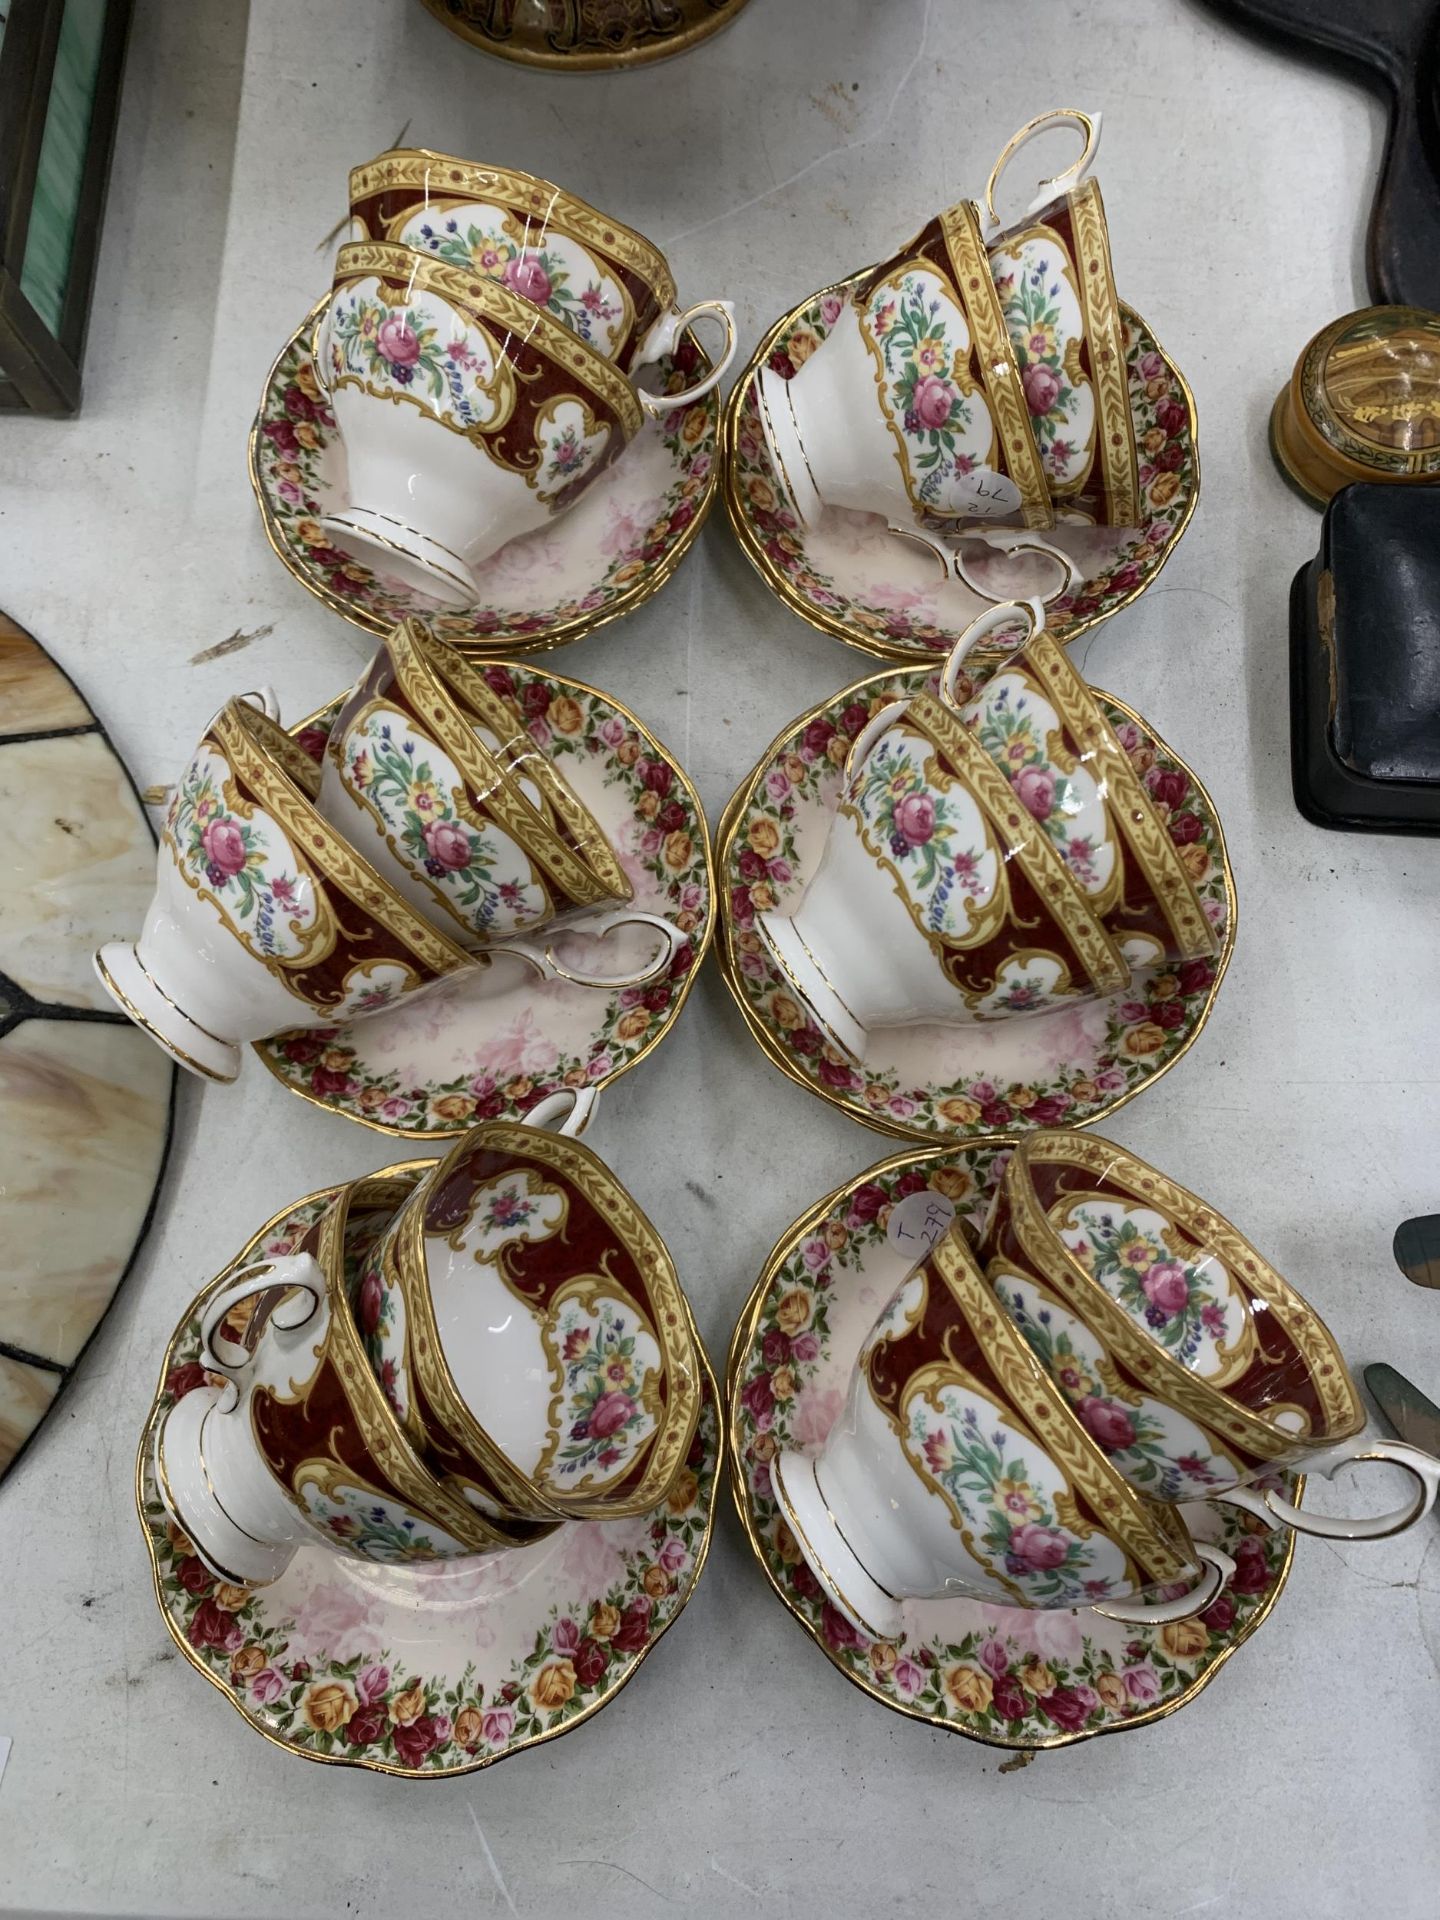 A QUANTITY OF ROYAL ALBERT 'LADY HAMILTON' CUPS AND 'PEACH DAMASK' SAUCERS